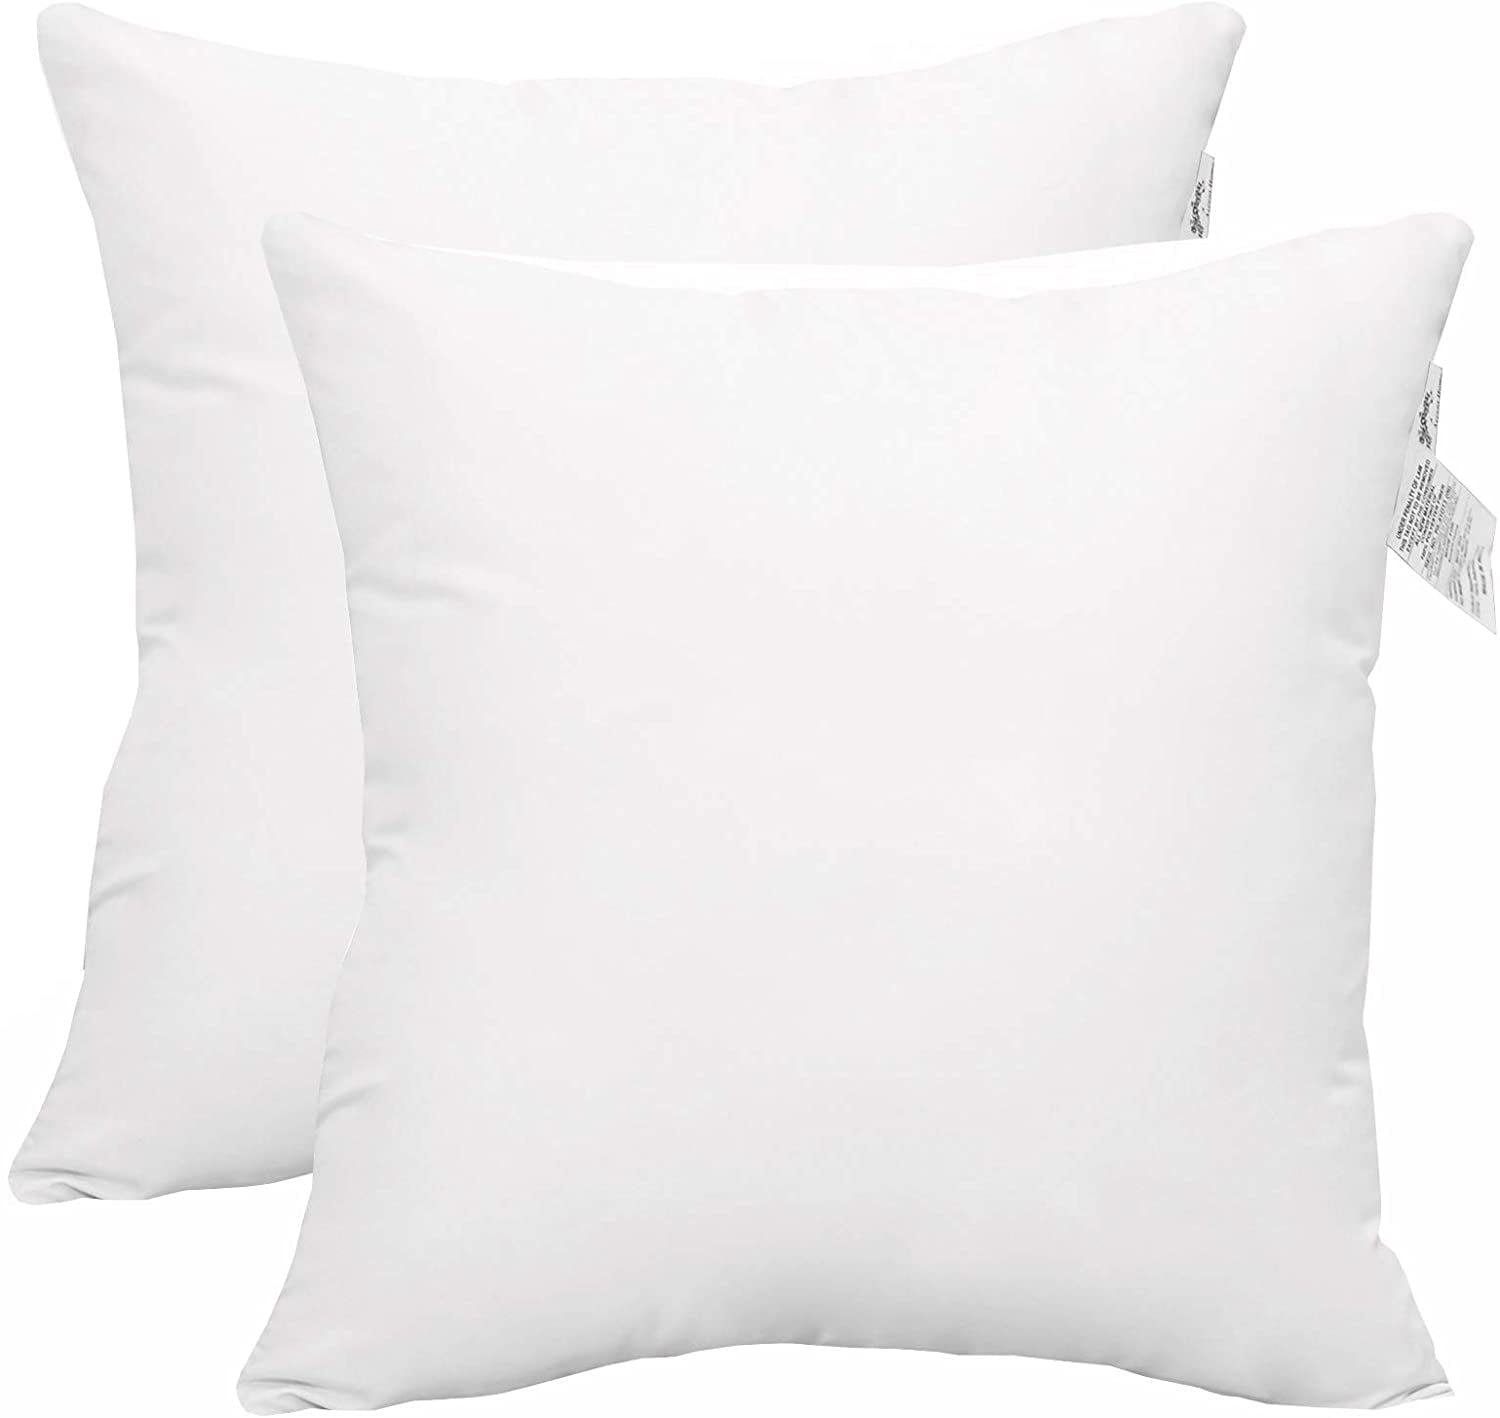 18” Plush Pillows – Set of 2 Luxury Square Accent Pillow Inserts and Shag  Glam Covers – For Bedroom or Living Room by Lavish Home (White)